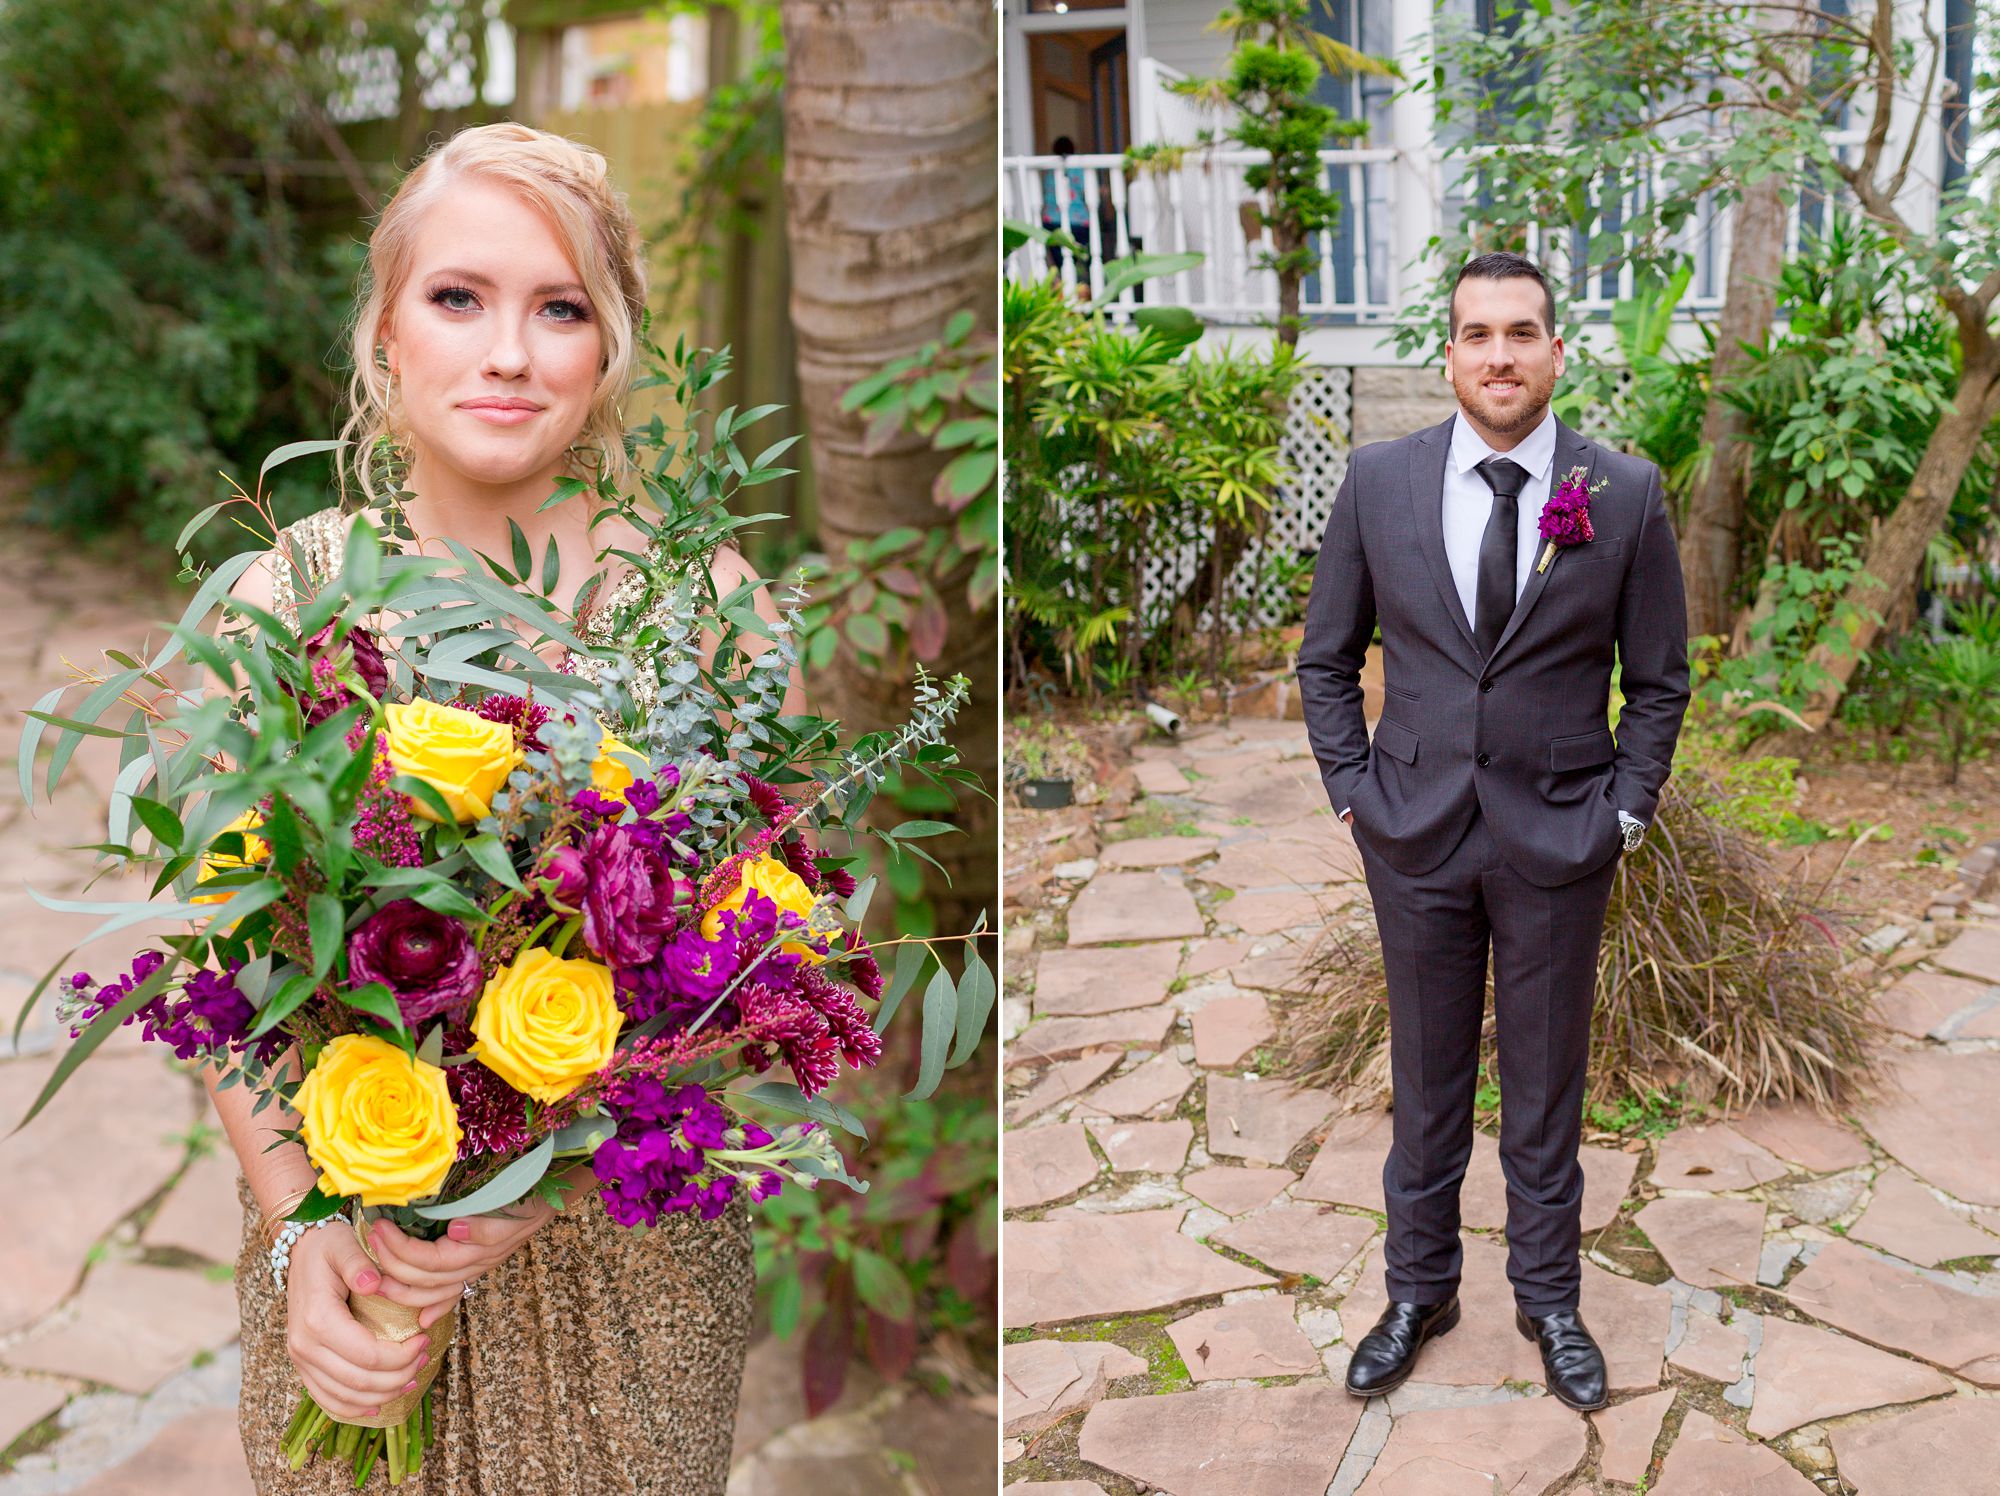 Portrait of a bride with here fuchsia and yellow bouquet; portrait of groom in charcoal suit